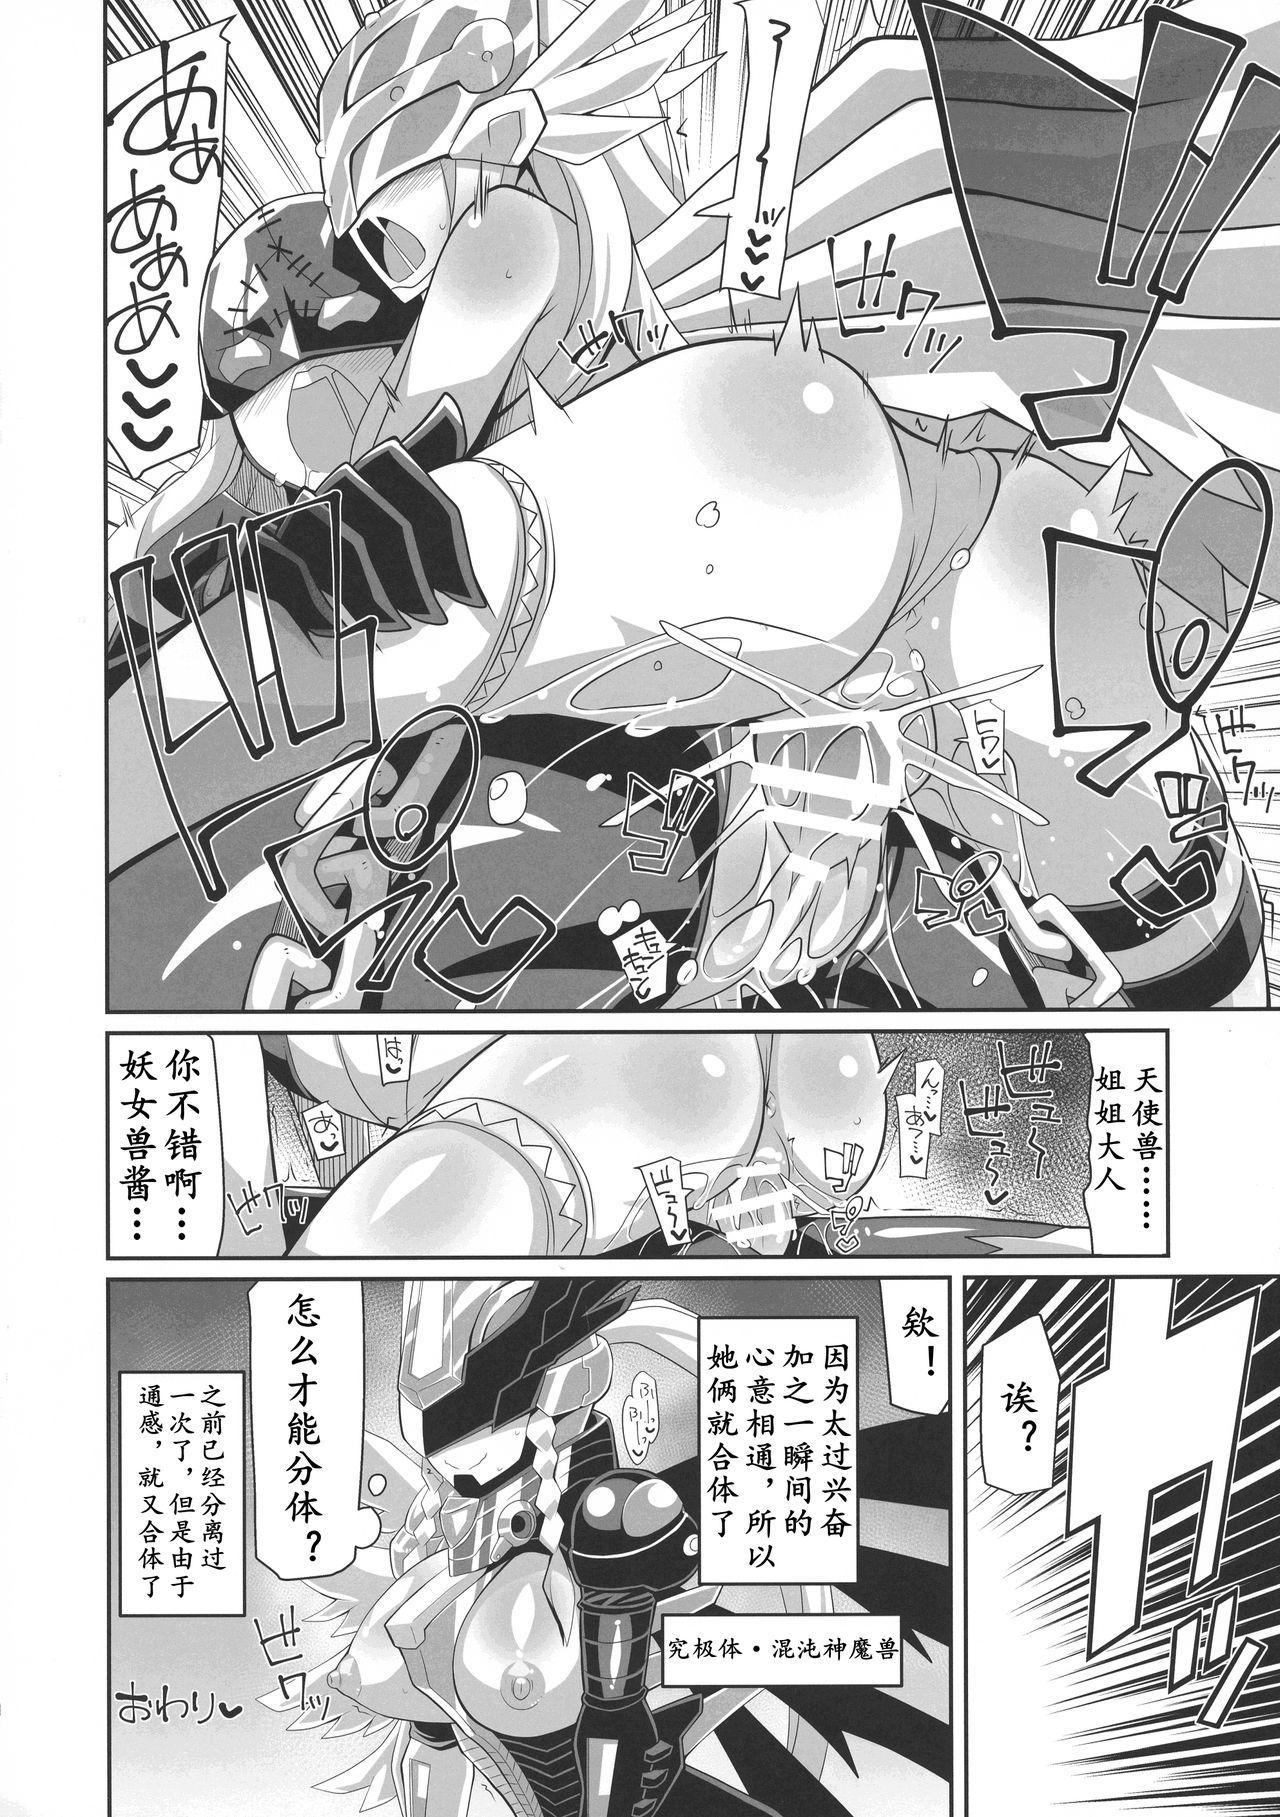 She ANGELSxDEMONS | 莫斯提兽 - Digimon Gay Youngmen - Page 11